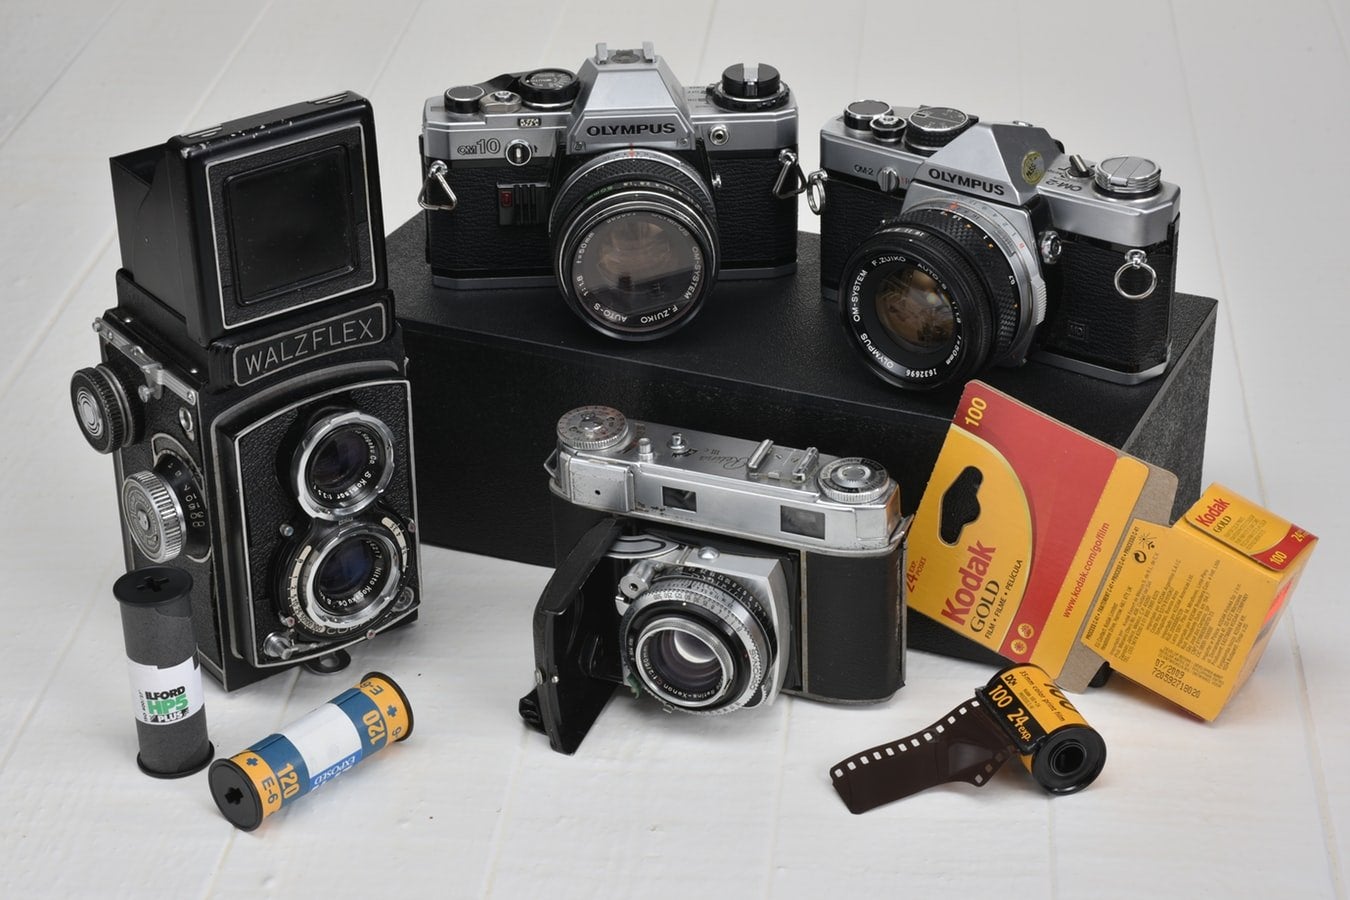 various films cameras and rolls of film stock against white background